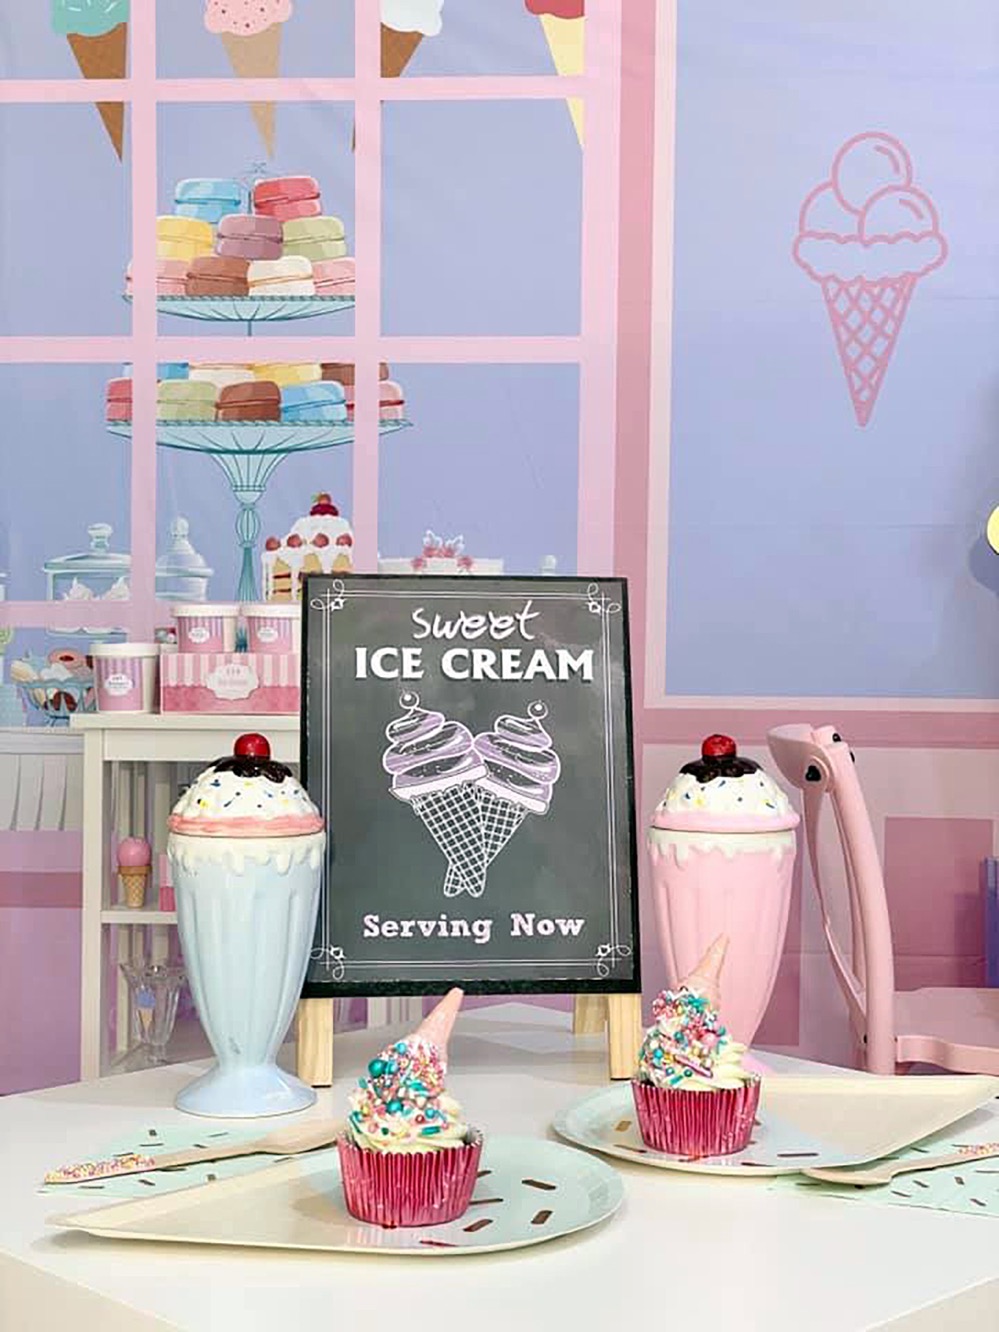 ice-cream parlour party, Home ice-cream parlour party!